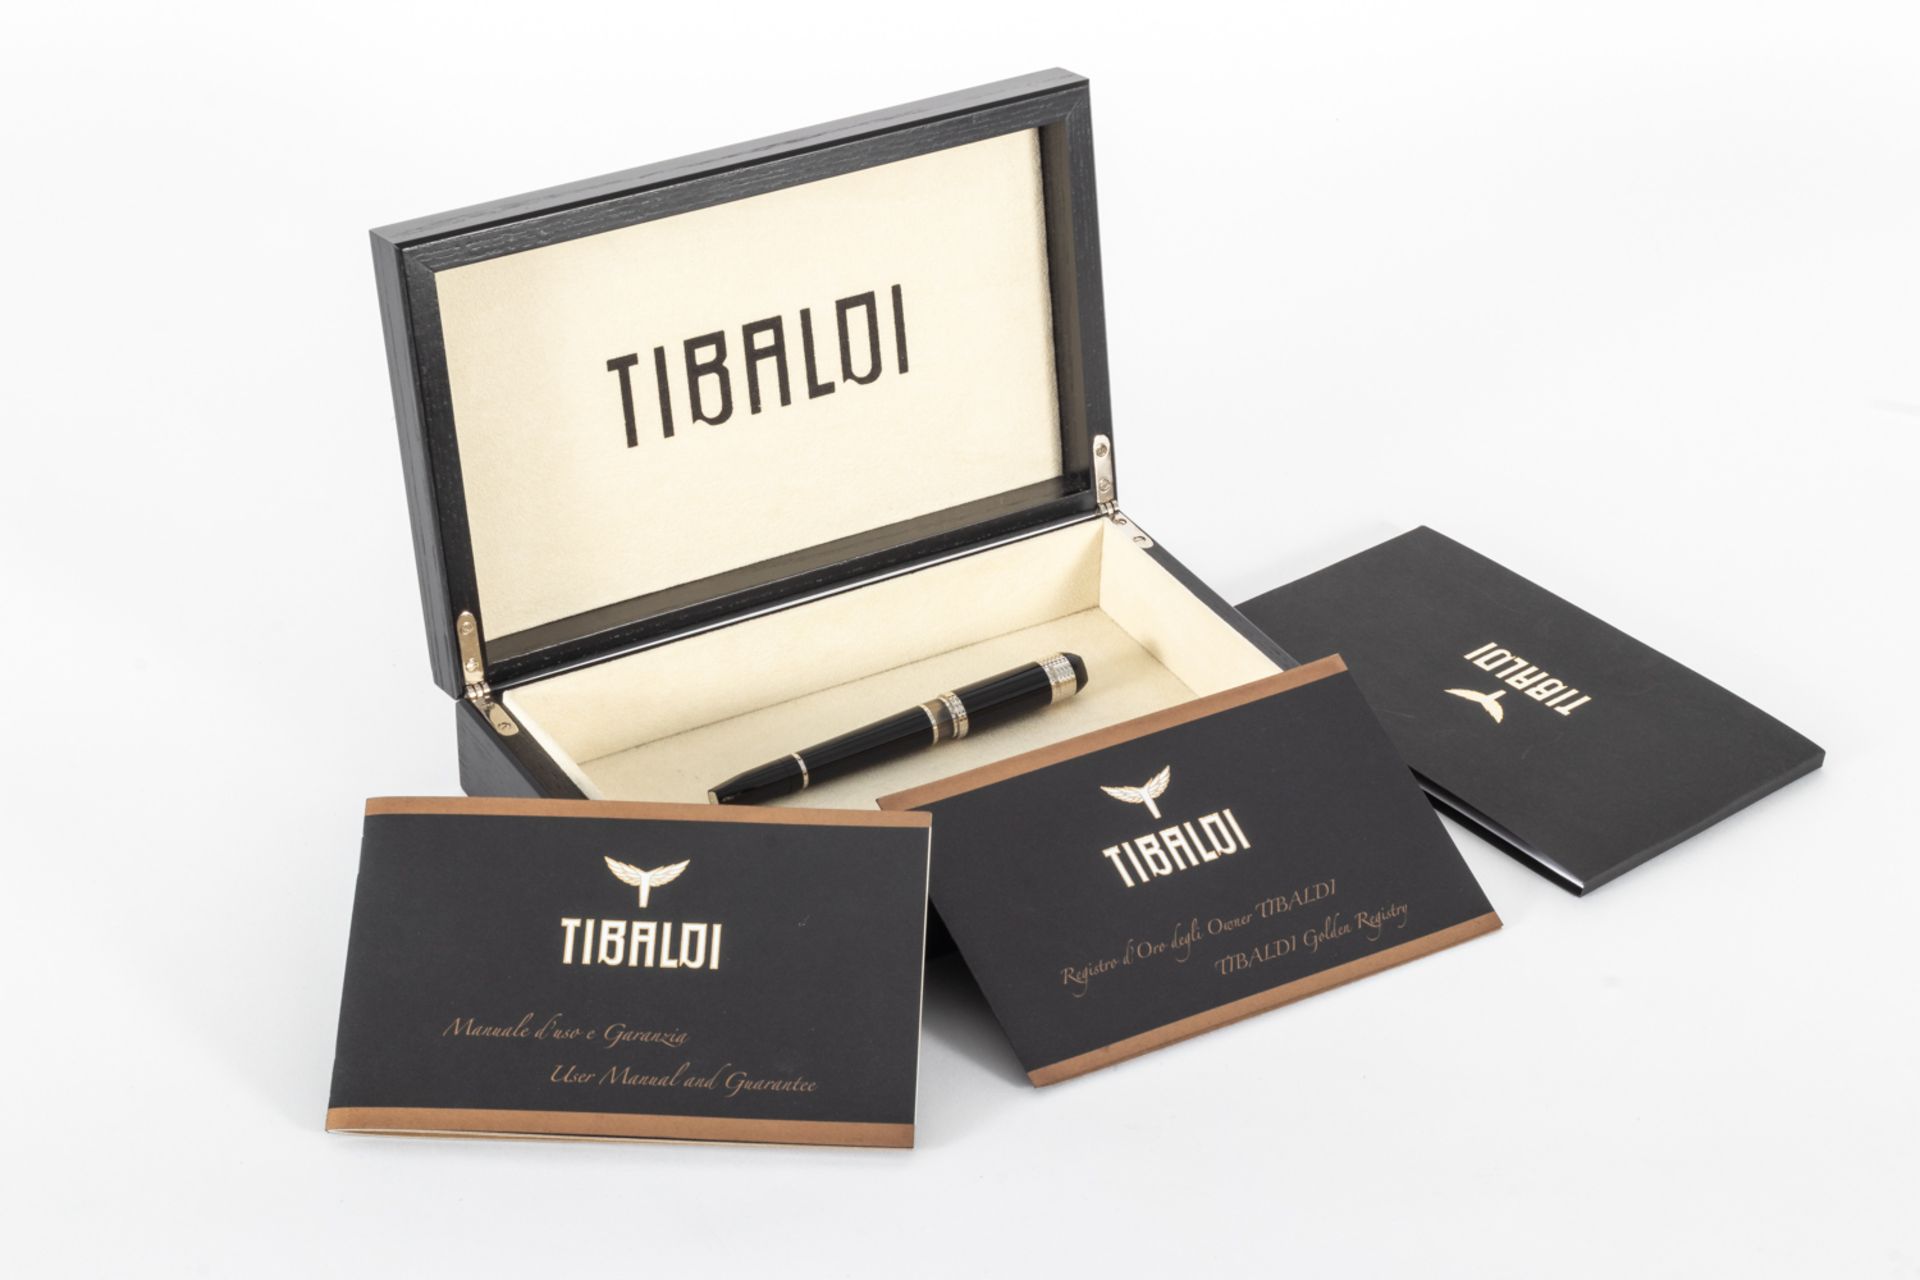 Tibaldi "Divina" fountain pen. Limited edition numbered 203/618. 